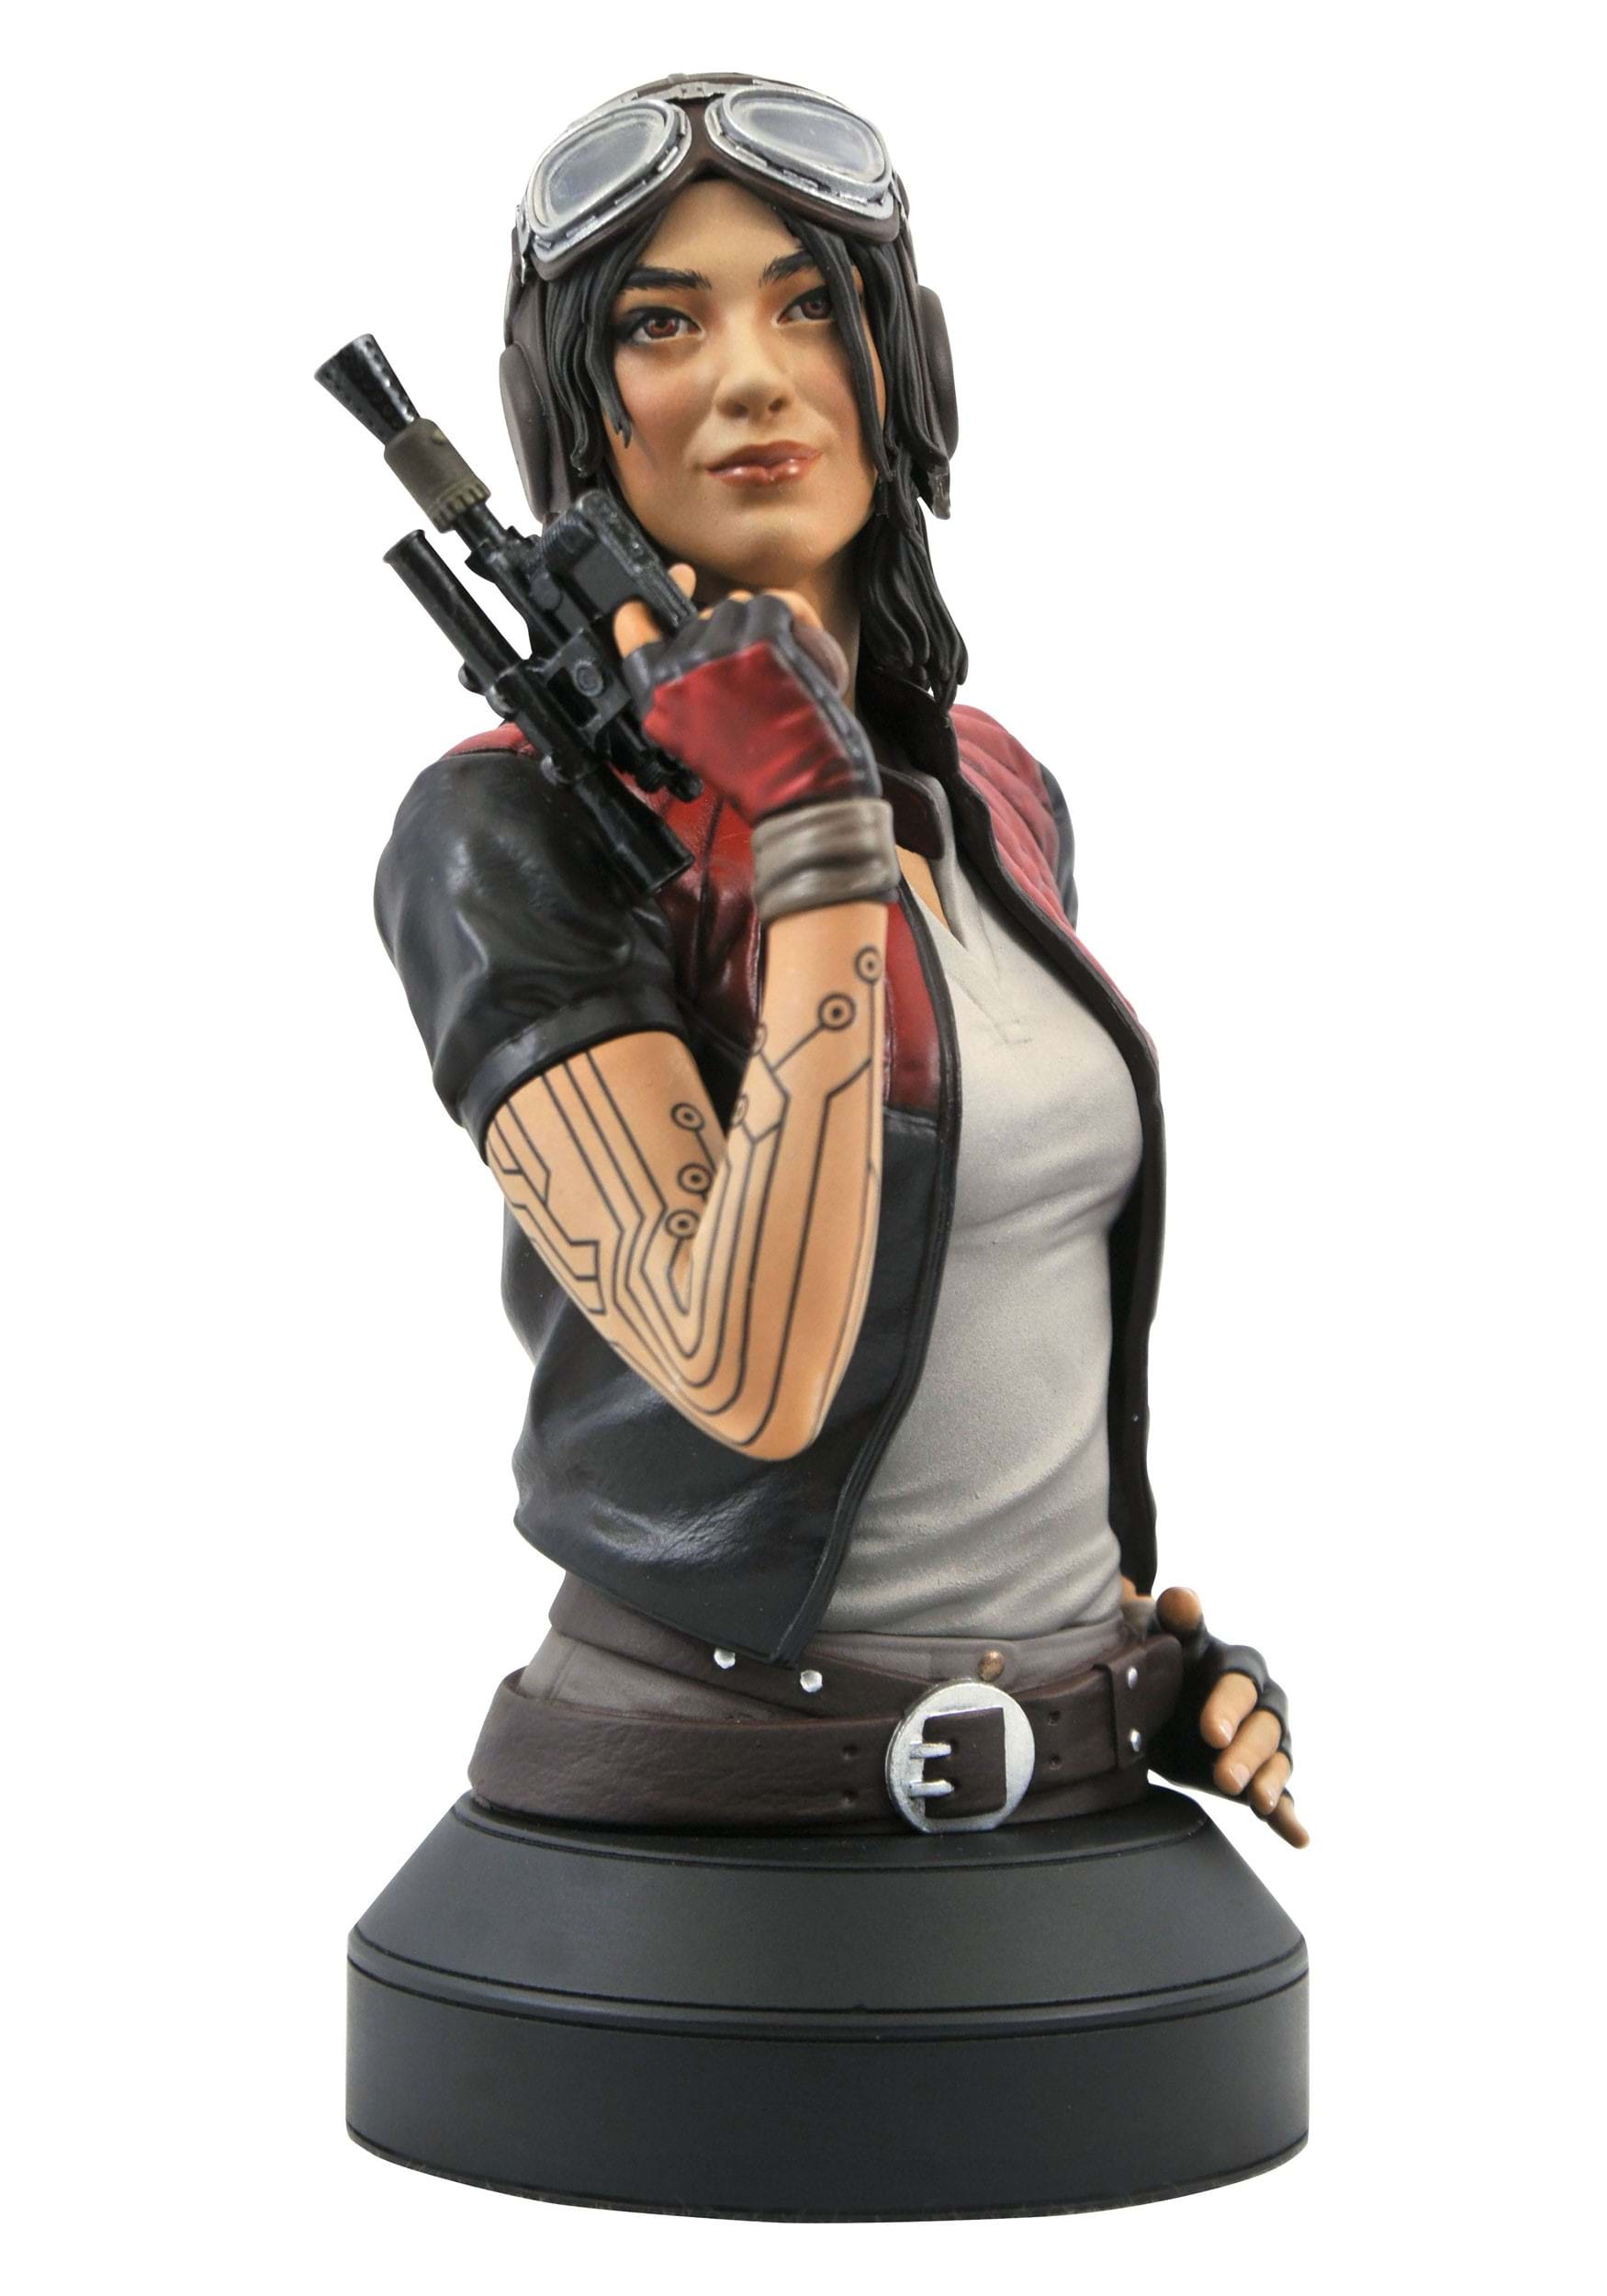 Image of Gentle Giant Star Wars Comic Dr Aphra 1/6 Scale Bust by Gentle Giant